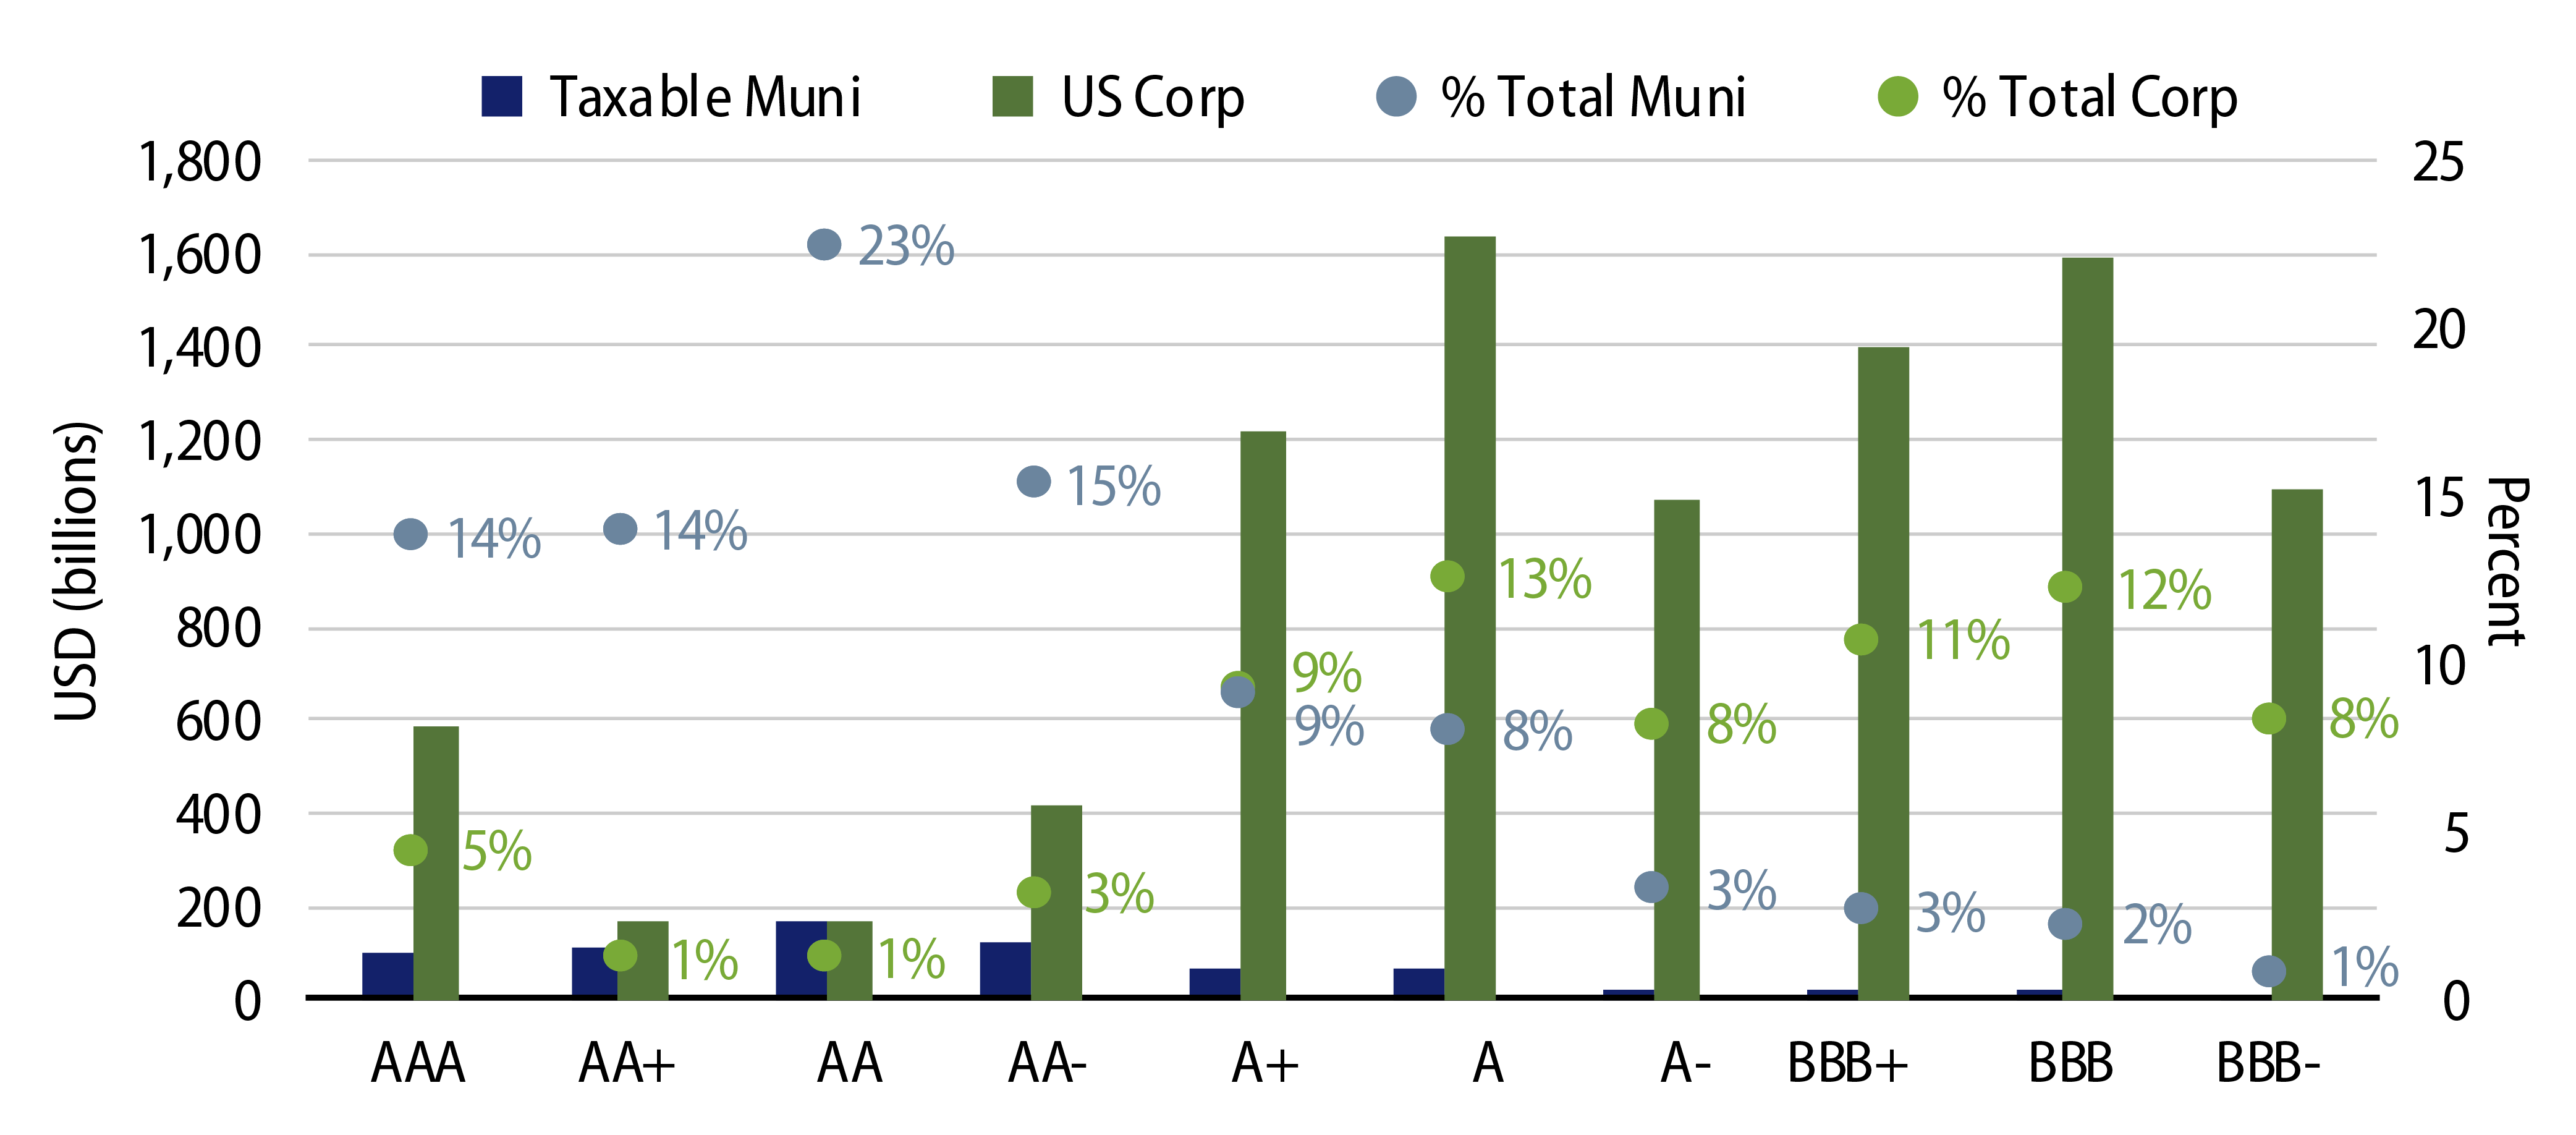 Explore Taxable Munis vs. Corporate Debt Outstanding by Rating Category